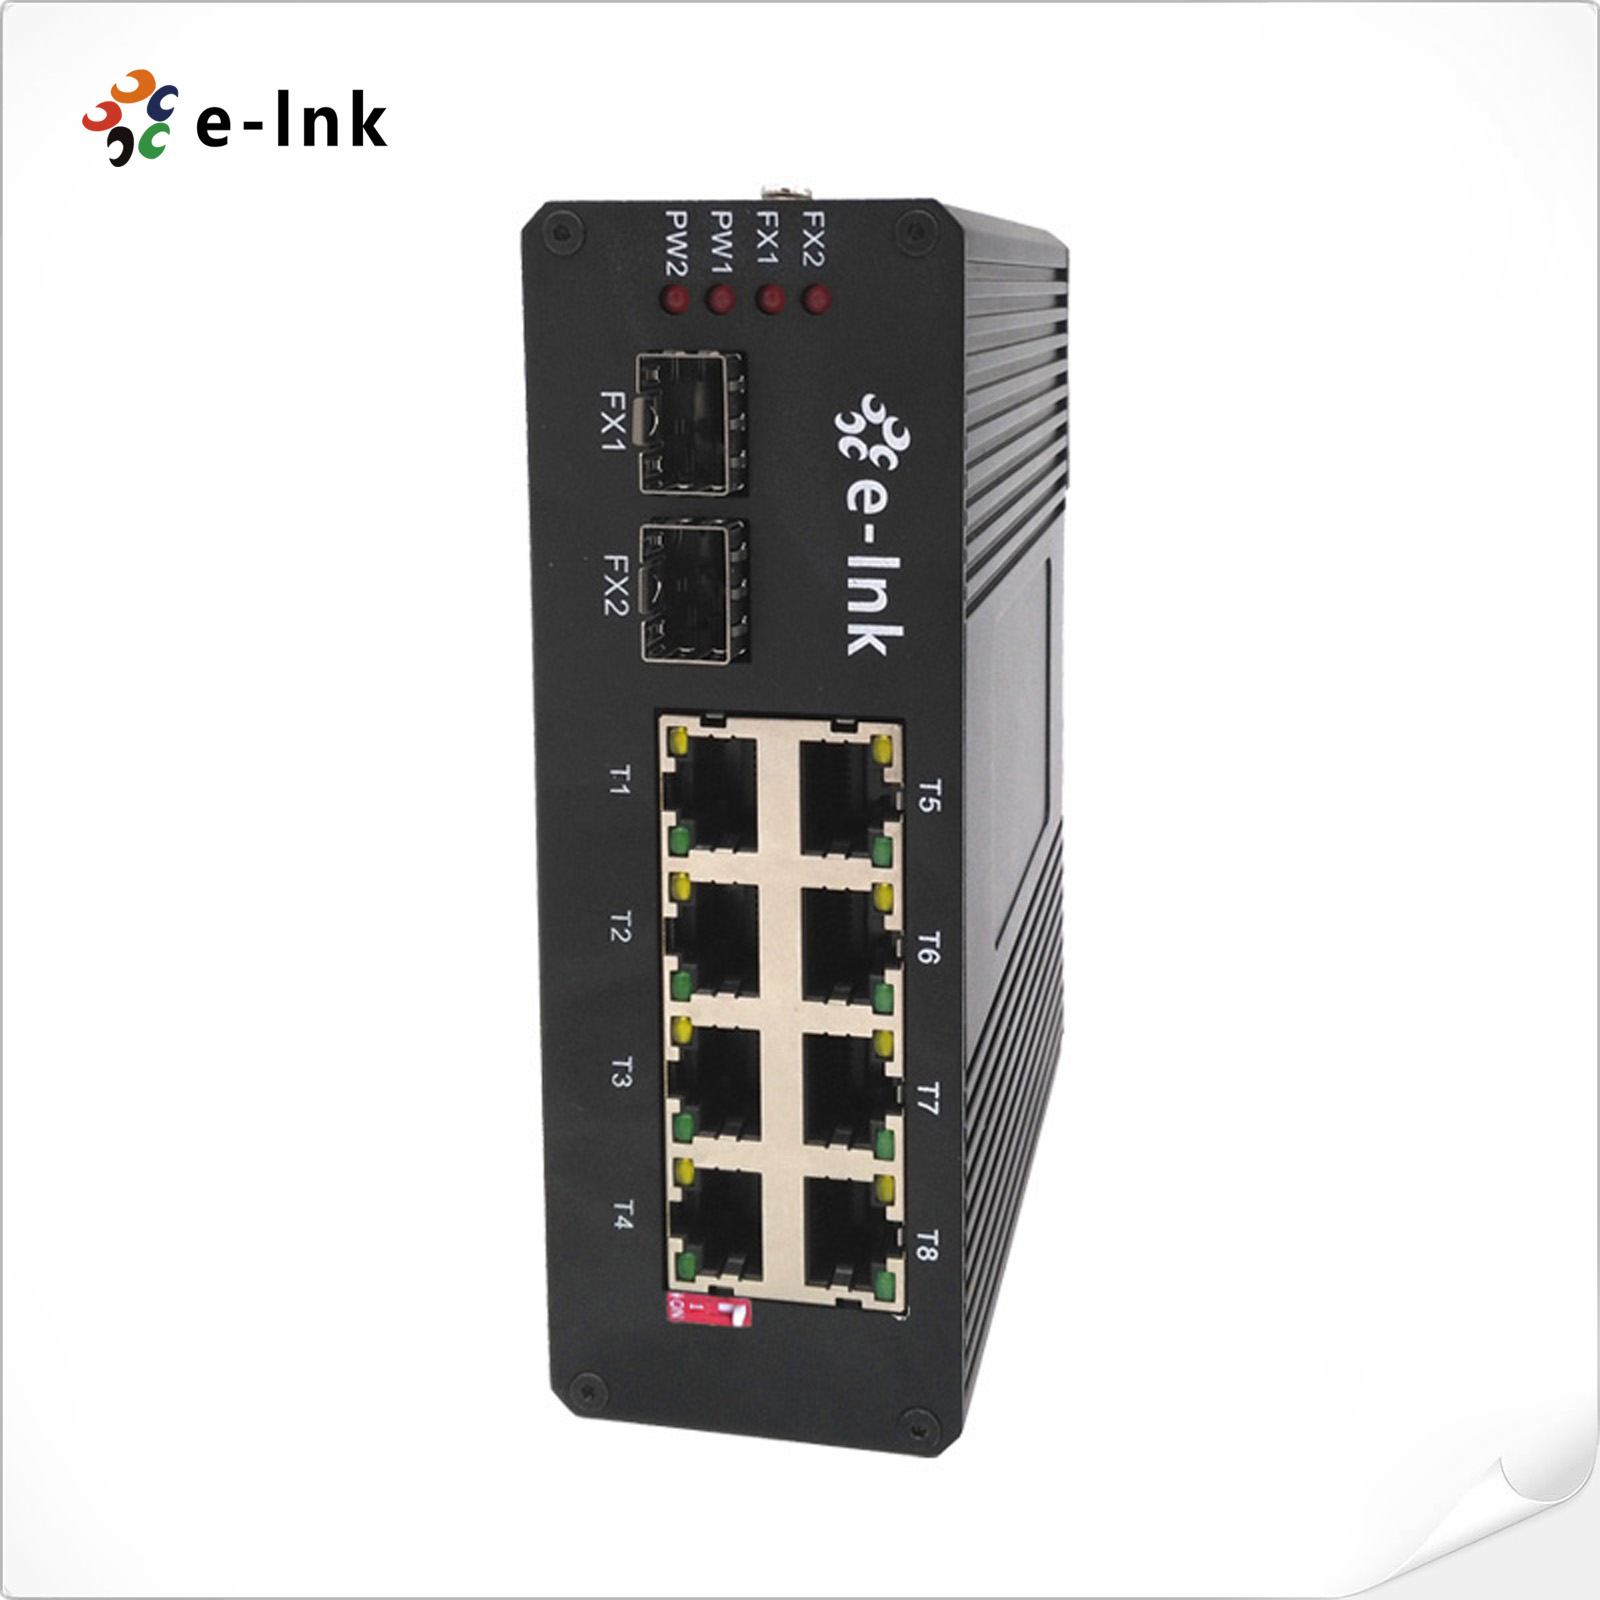 8 RJ45 ports + 2 SFP ports 10/100/1000Mbps 250meter Industrial PoE Switch